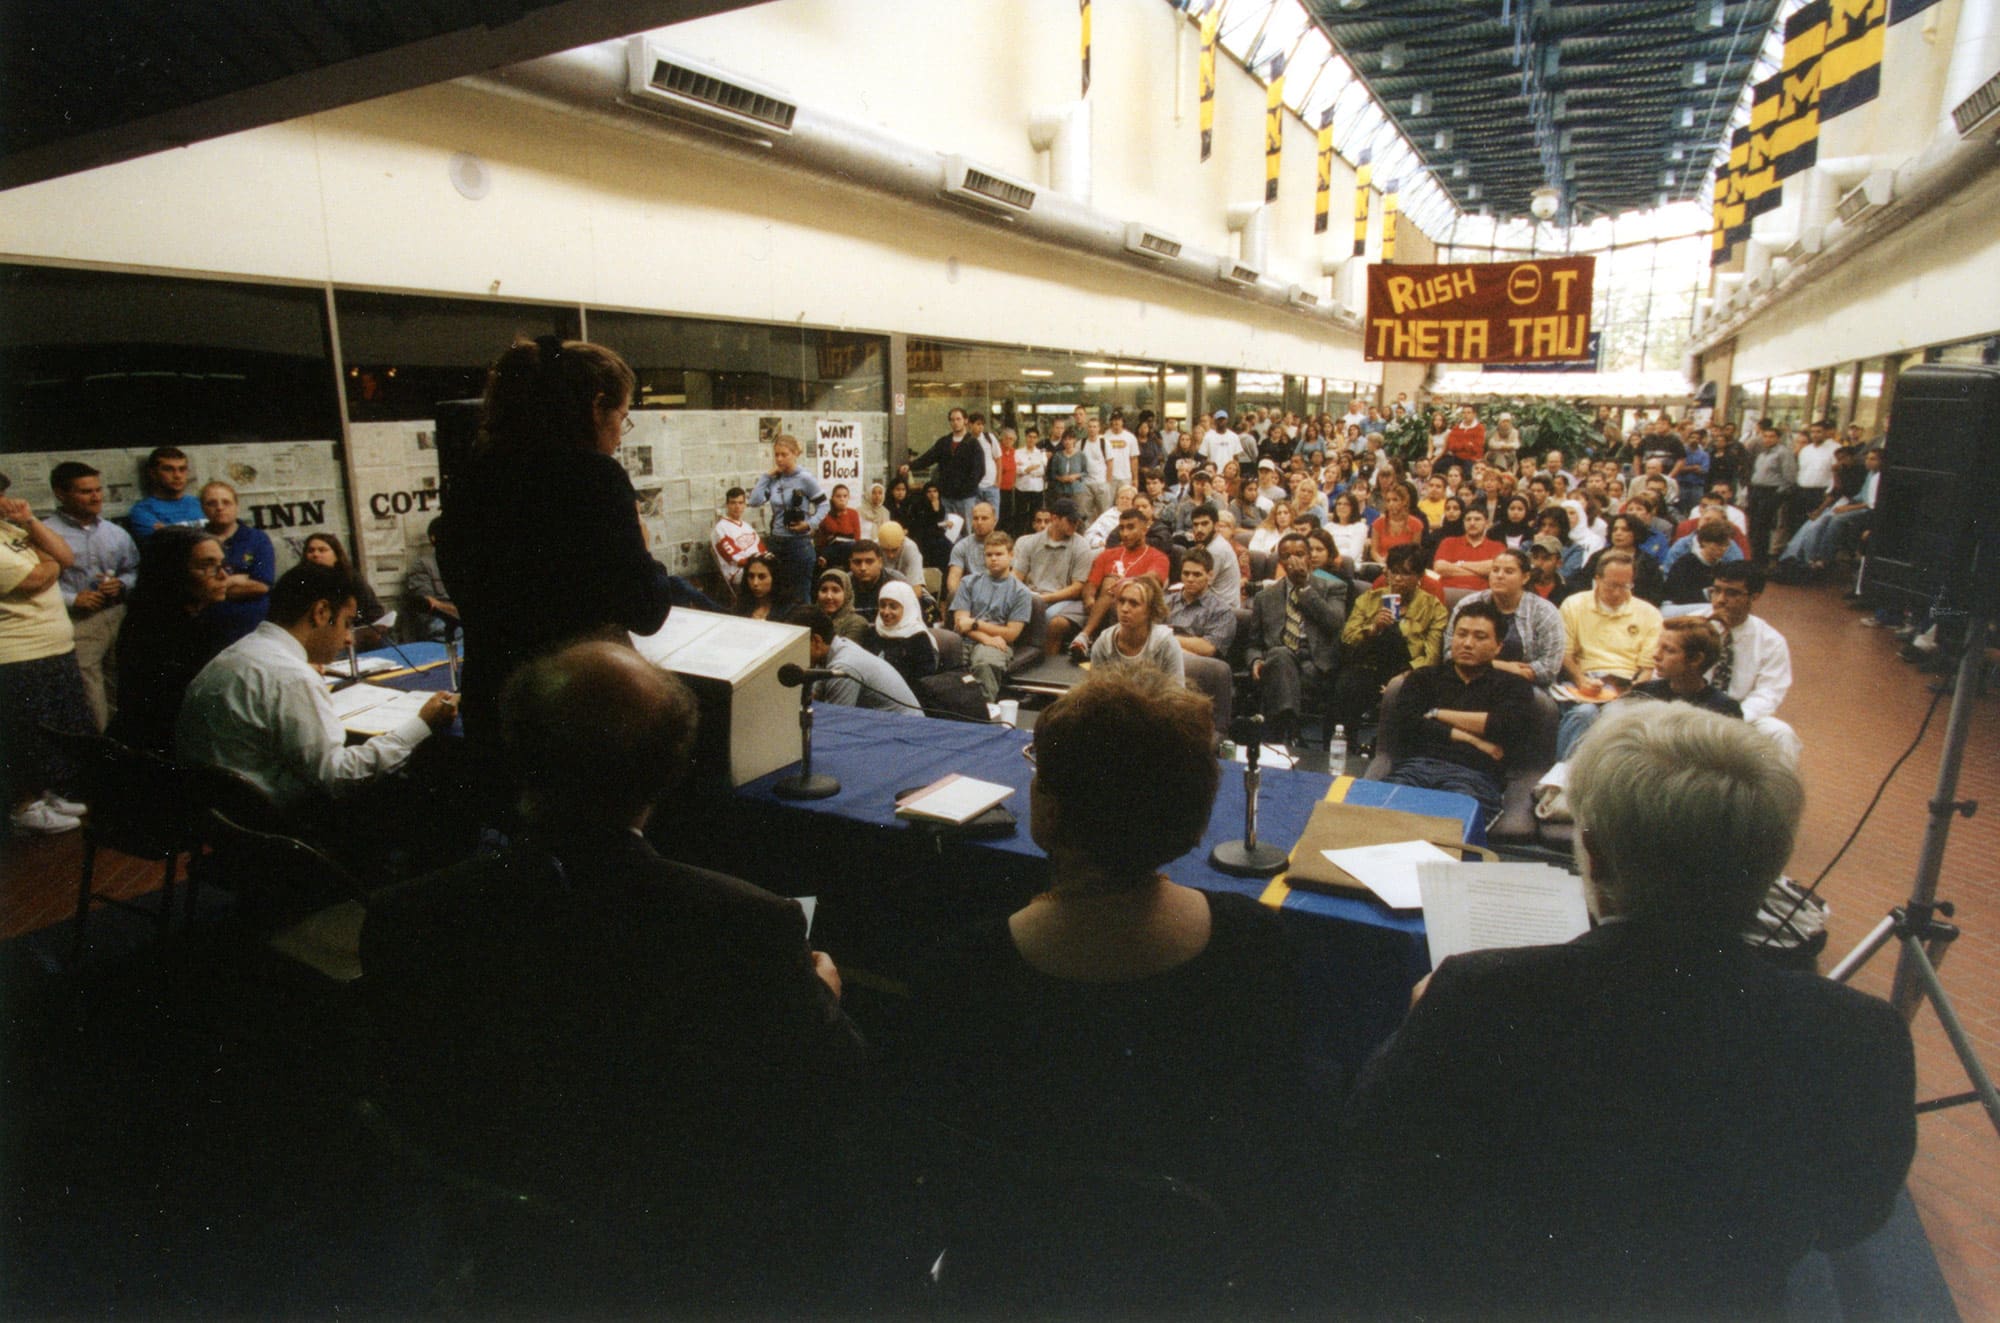 A large crowd listens to speakers at the 9/11 town hall.